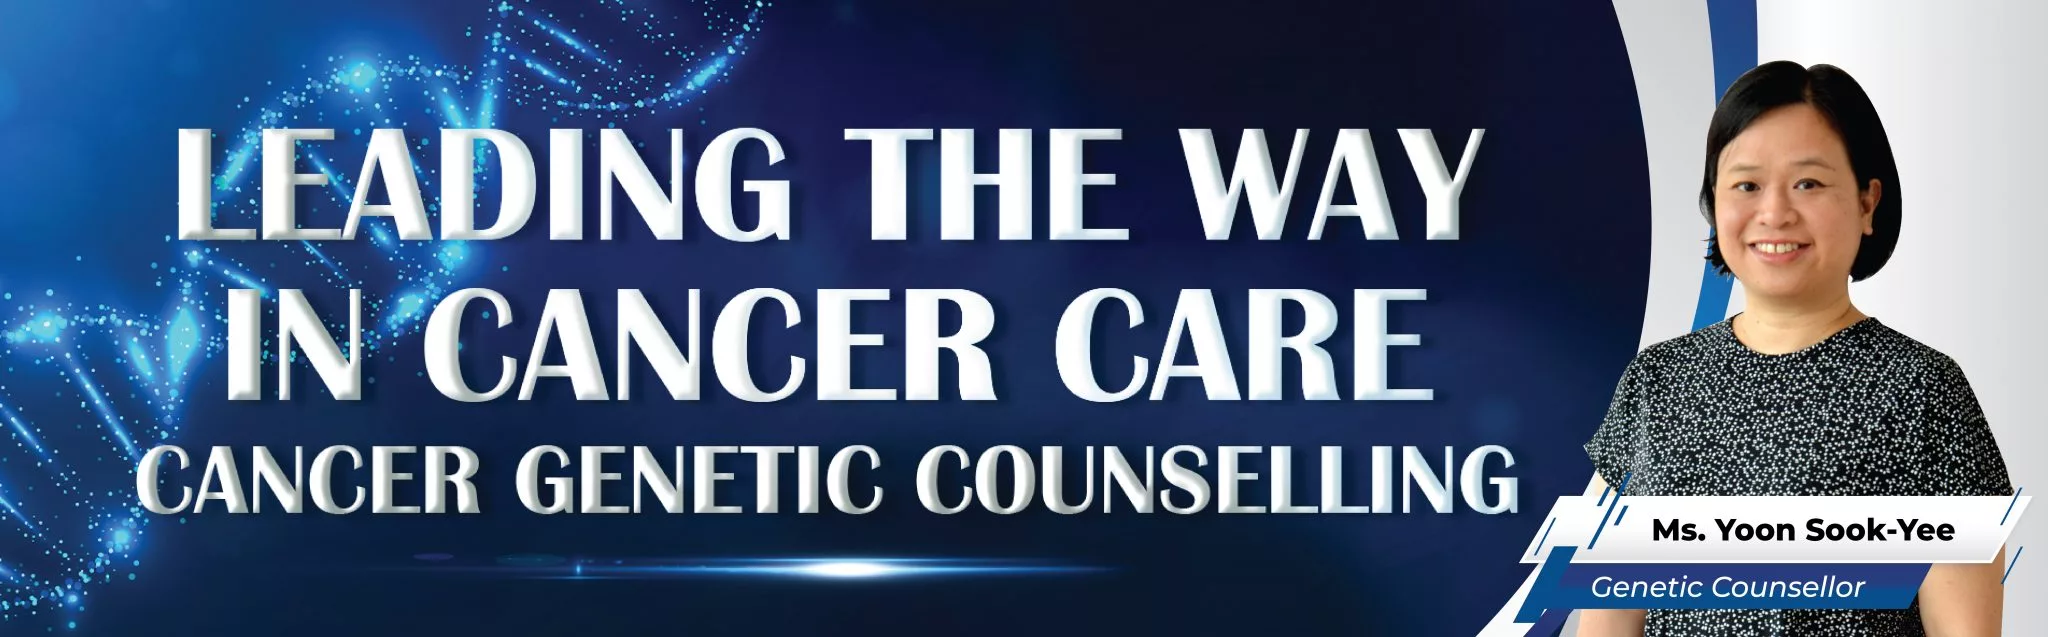 beacon-leading-cancer-genetic-counselling-malaysia